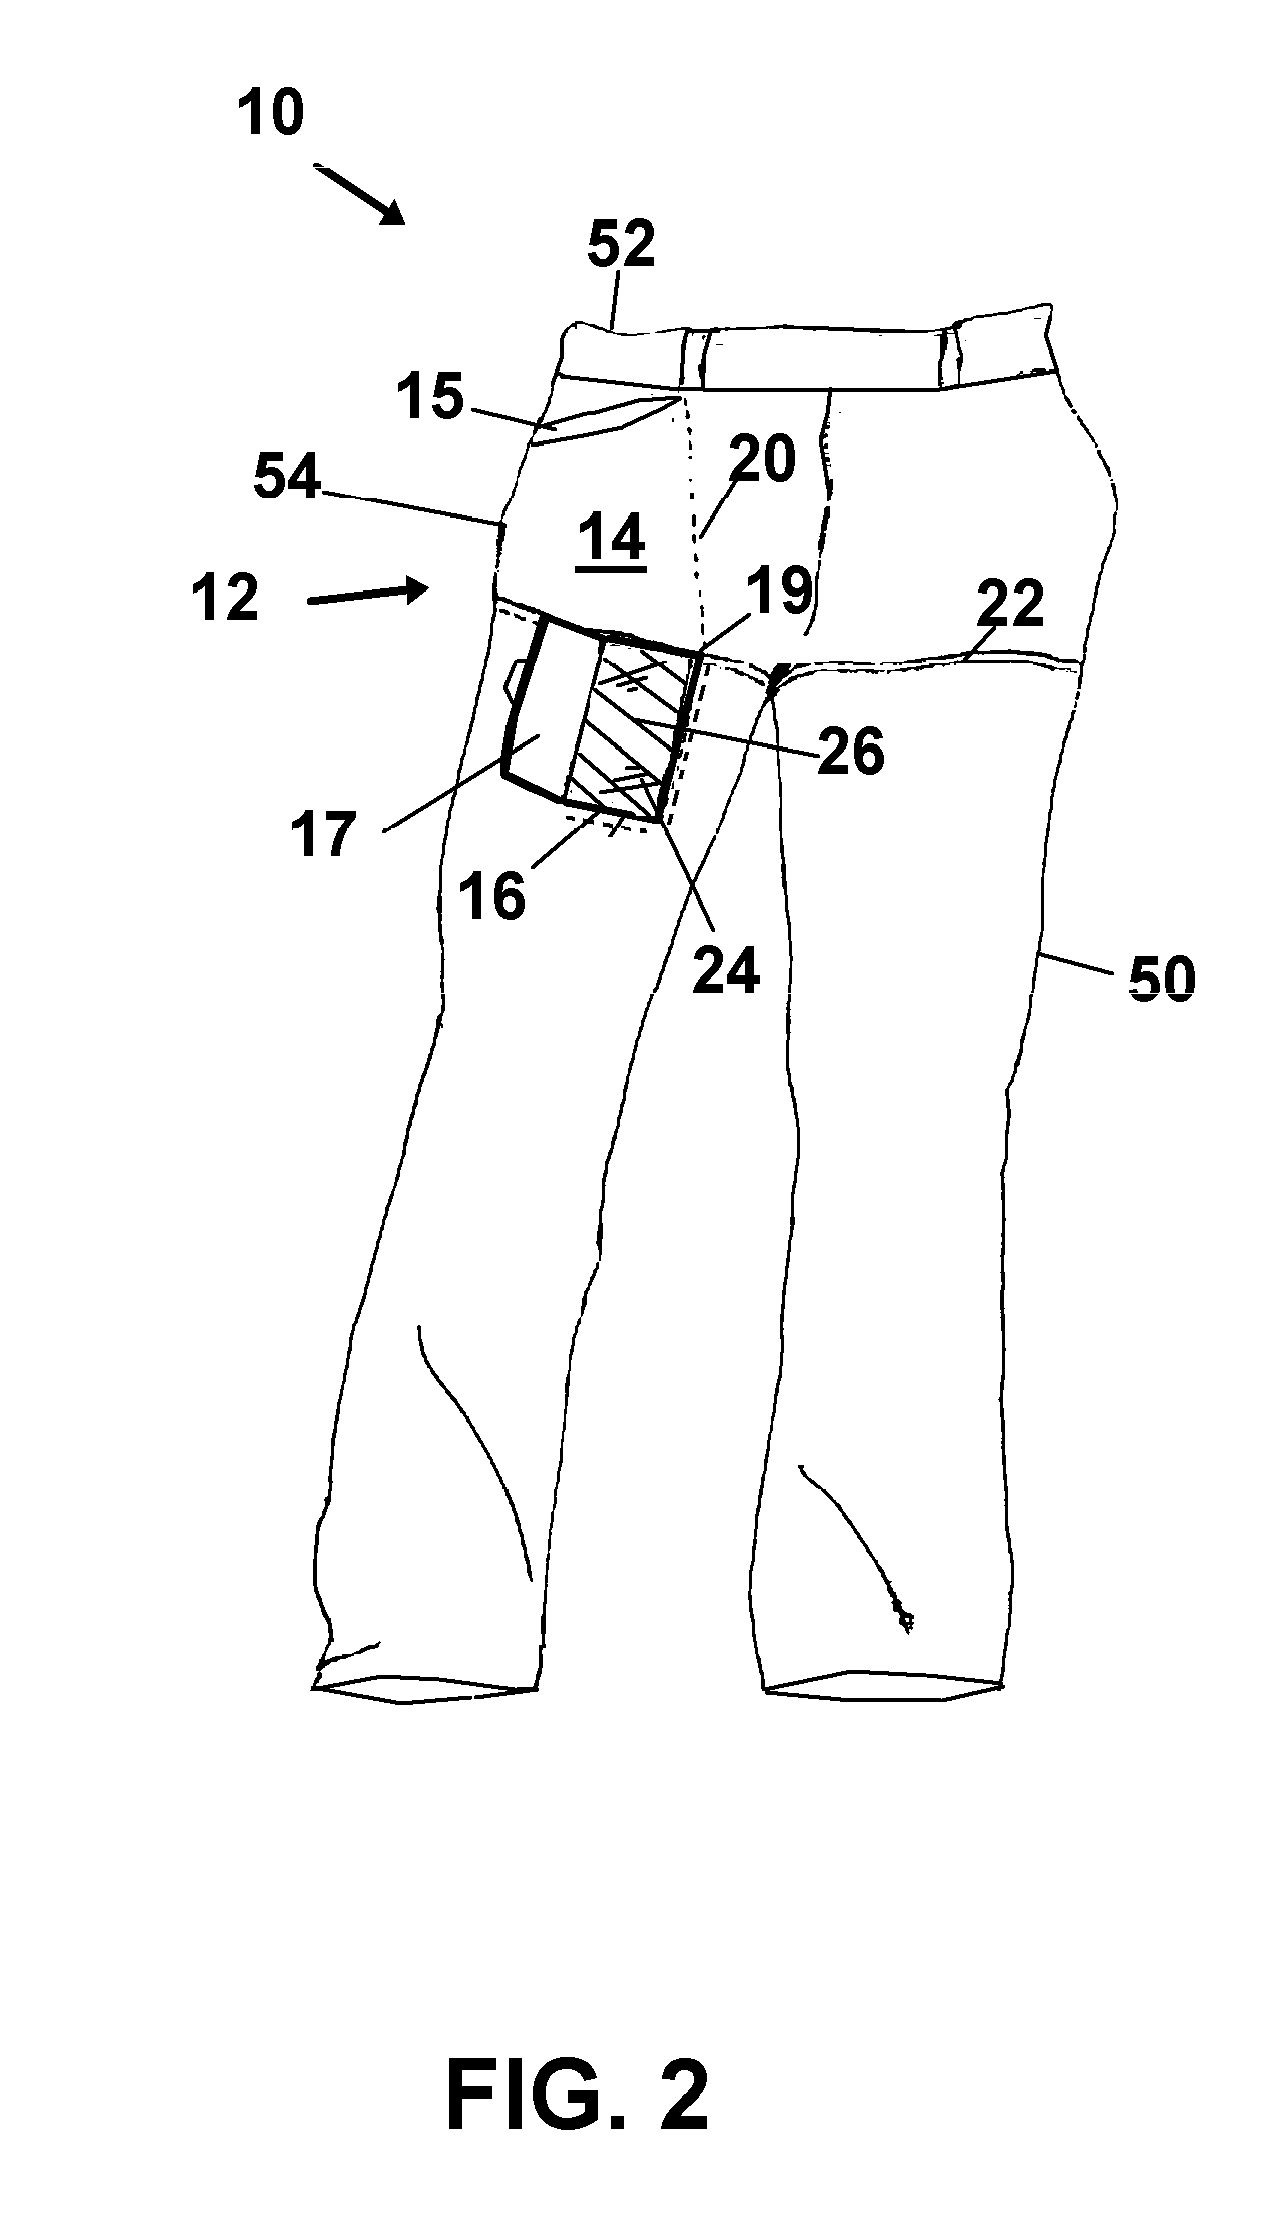 Pants Pocket for Touch Screen Mobile Devices